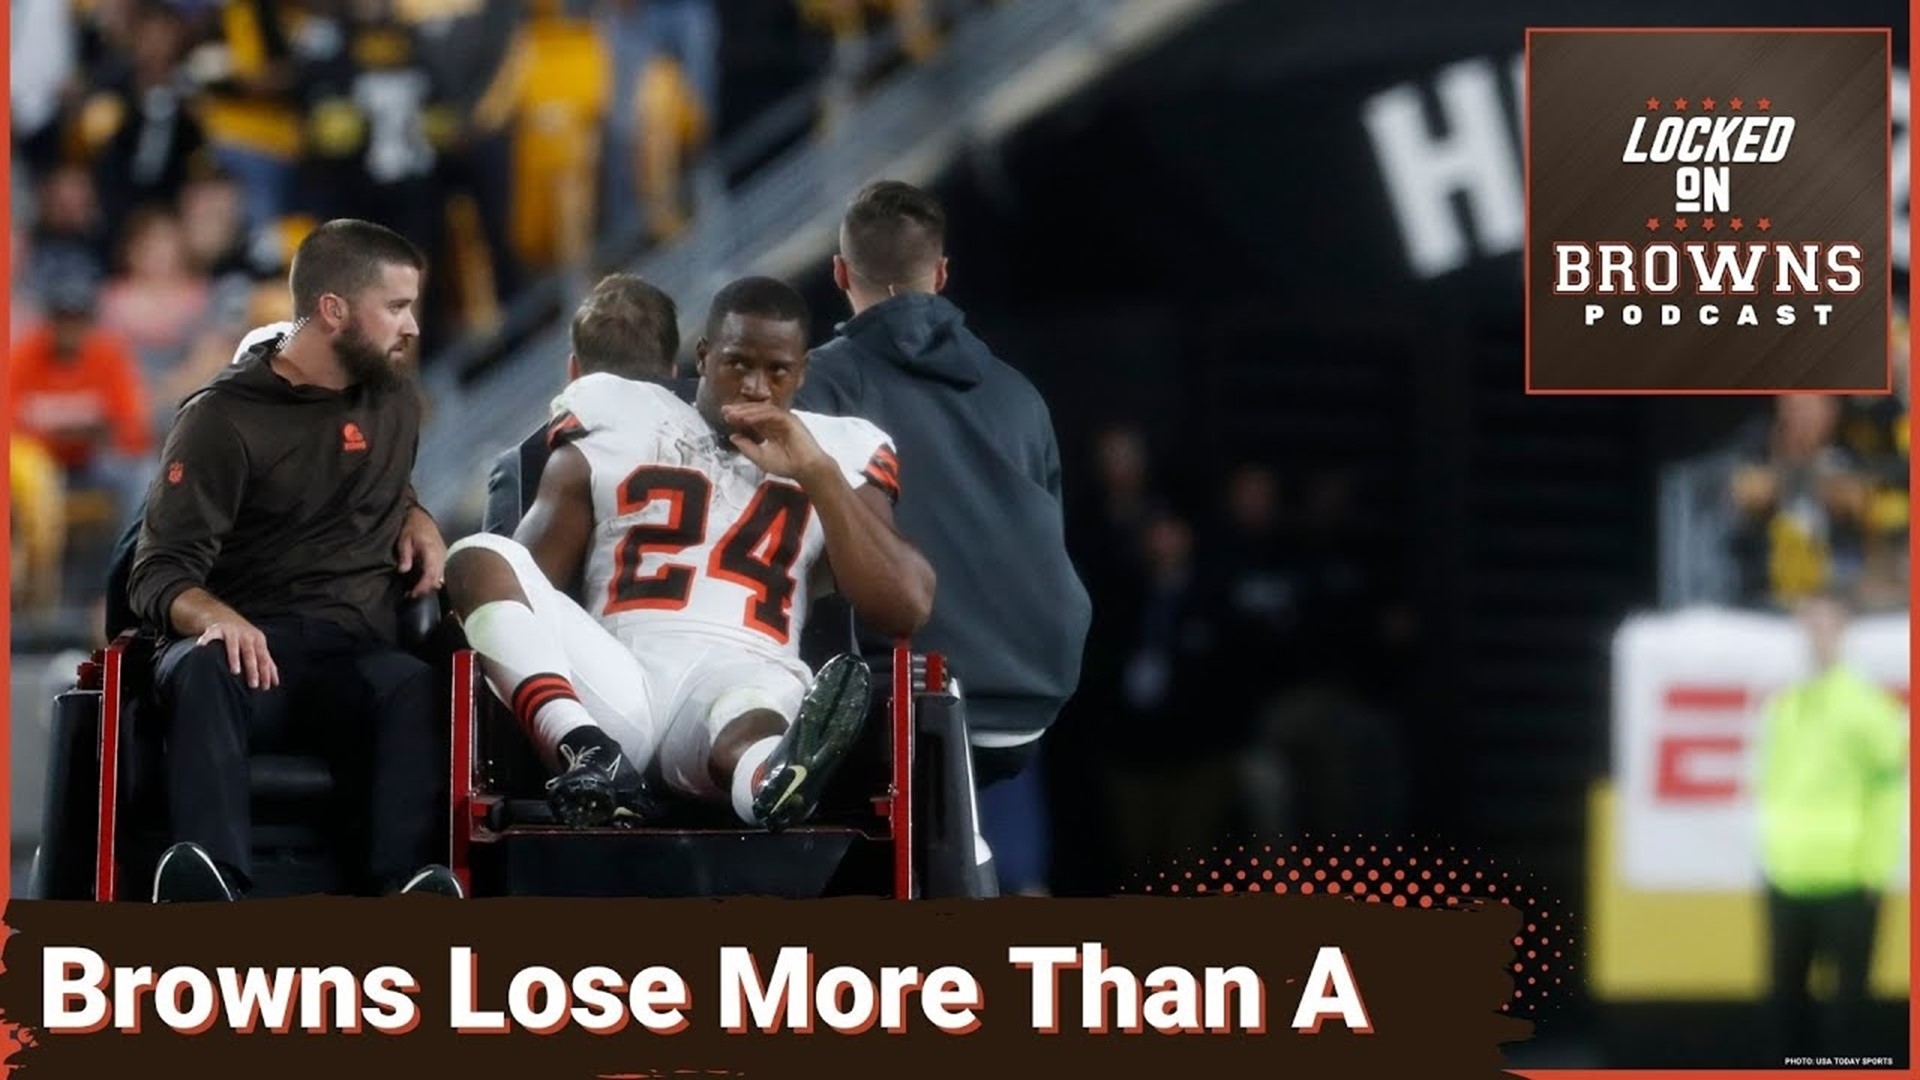 The Cleveland Browns lost to the Pittsburgh Steelers on Monday Night Football but worse than that they lost Nick Chubb to a severe knee injury